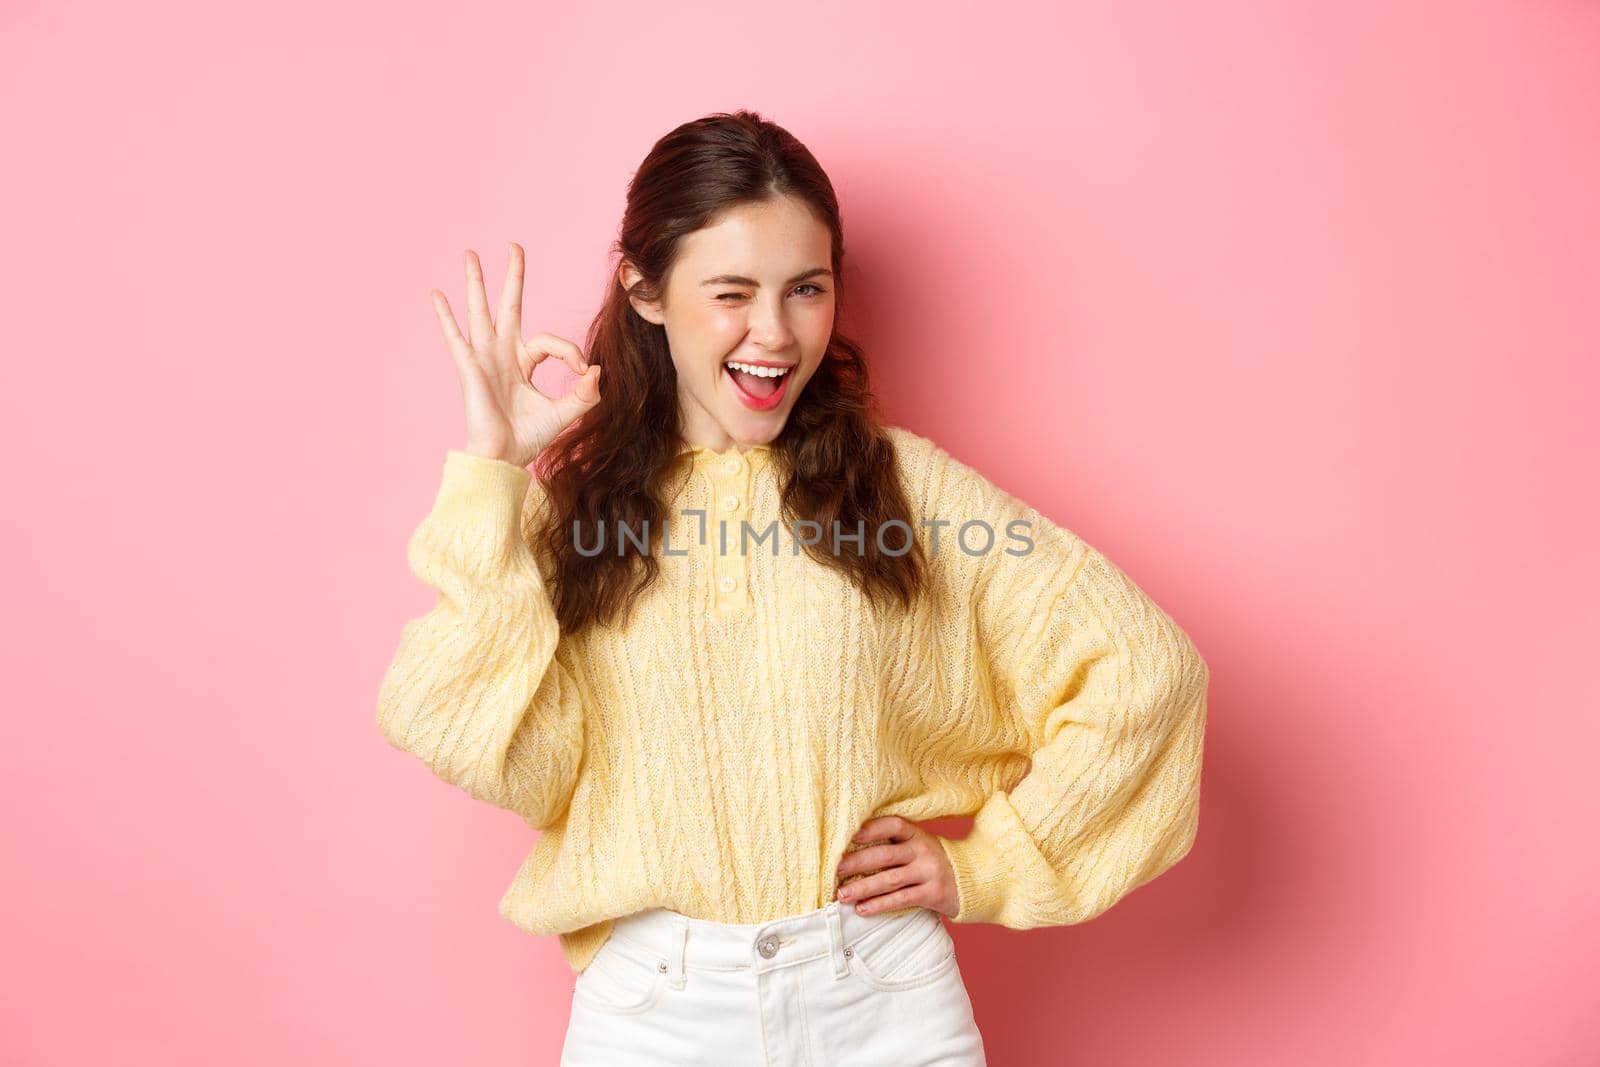 Cheeky young woman winking, showing okay sign, give her approval, like and approve good thing. Girl make OK gesture to give permission, say yes, standing over pink background.